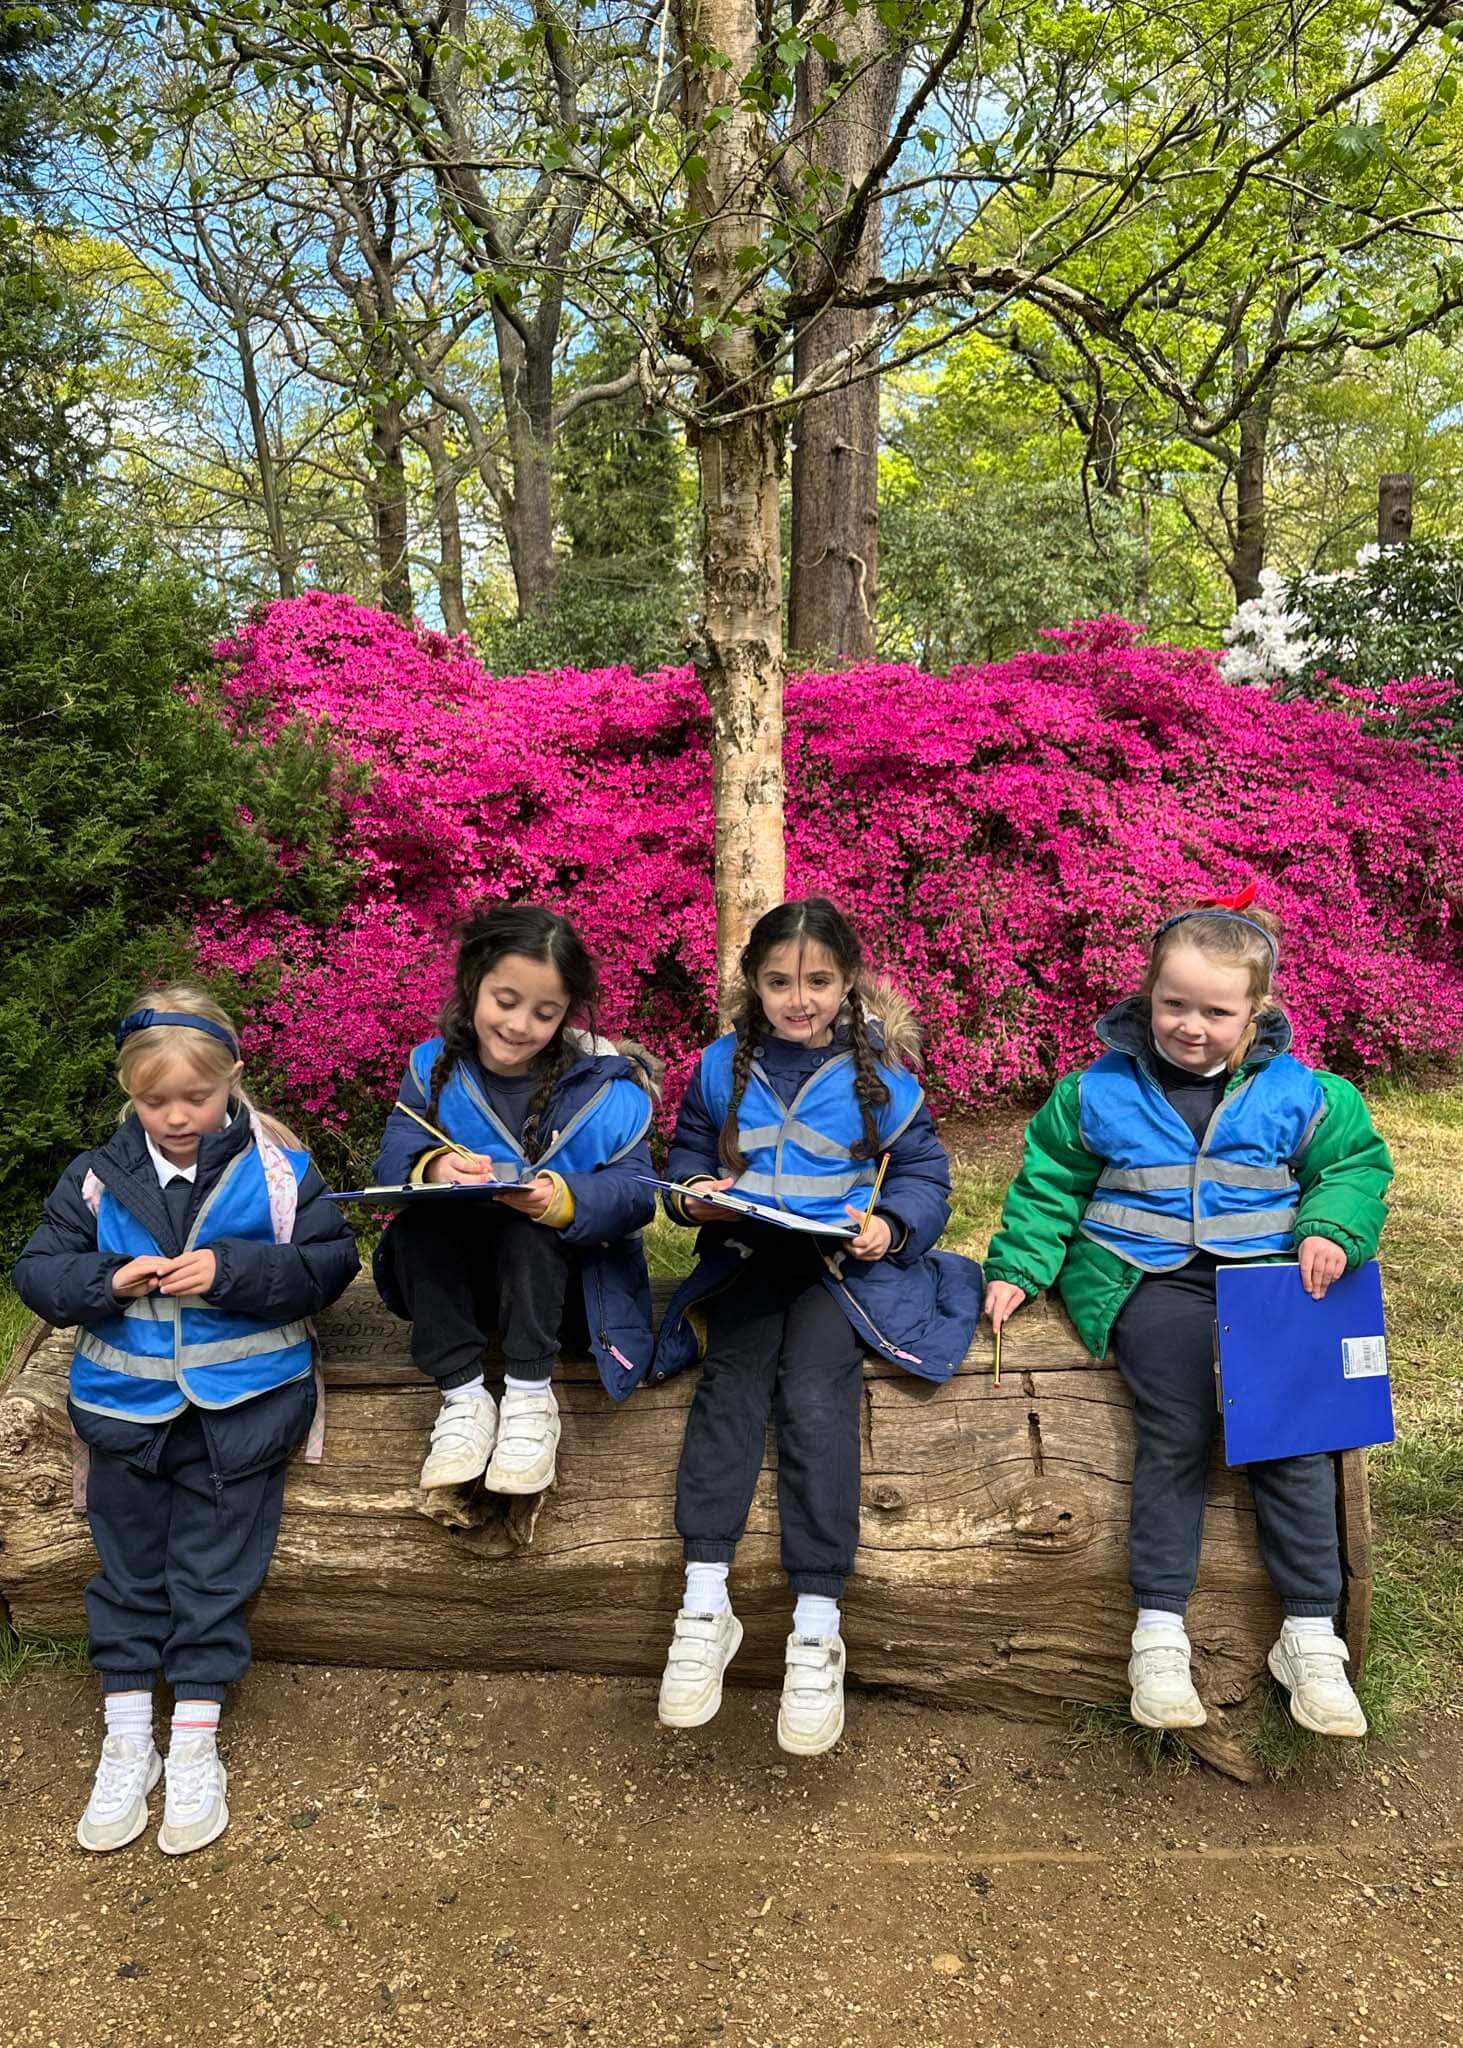 Kindergarten pupils taking notes of their surroundings | Ibstock Place School, a private school near Richmond, Barnes, Putney, Kingston, and Wandsworth.